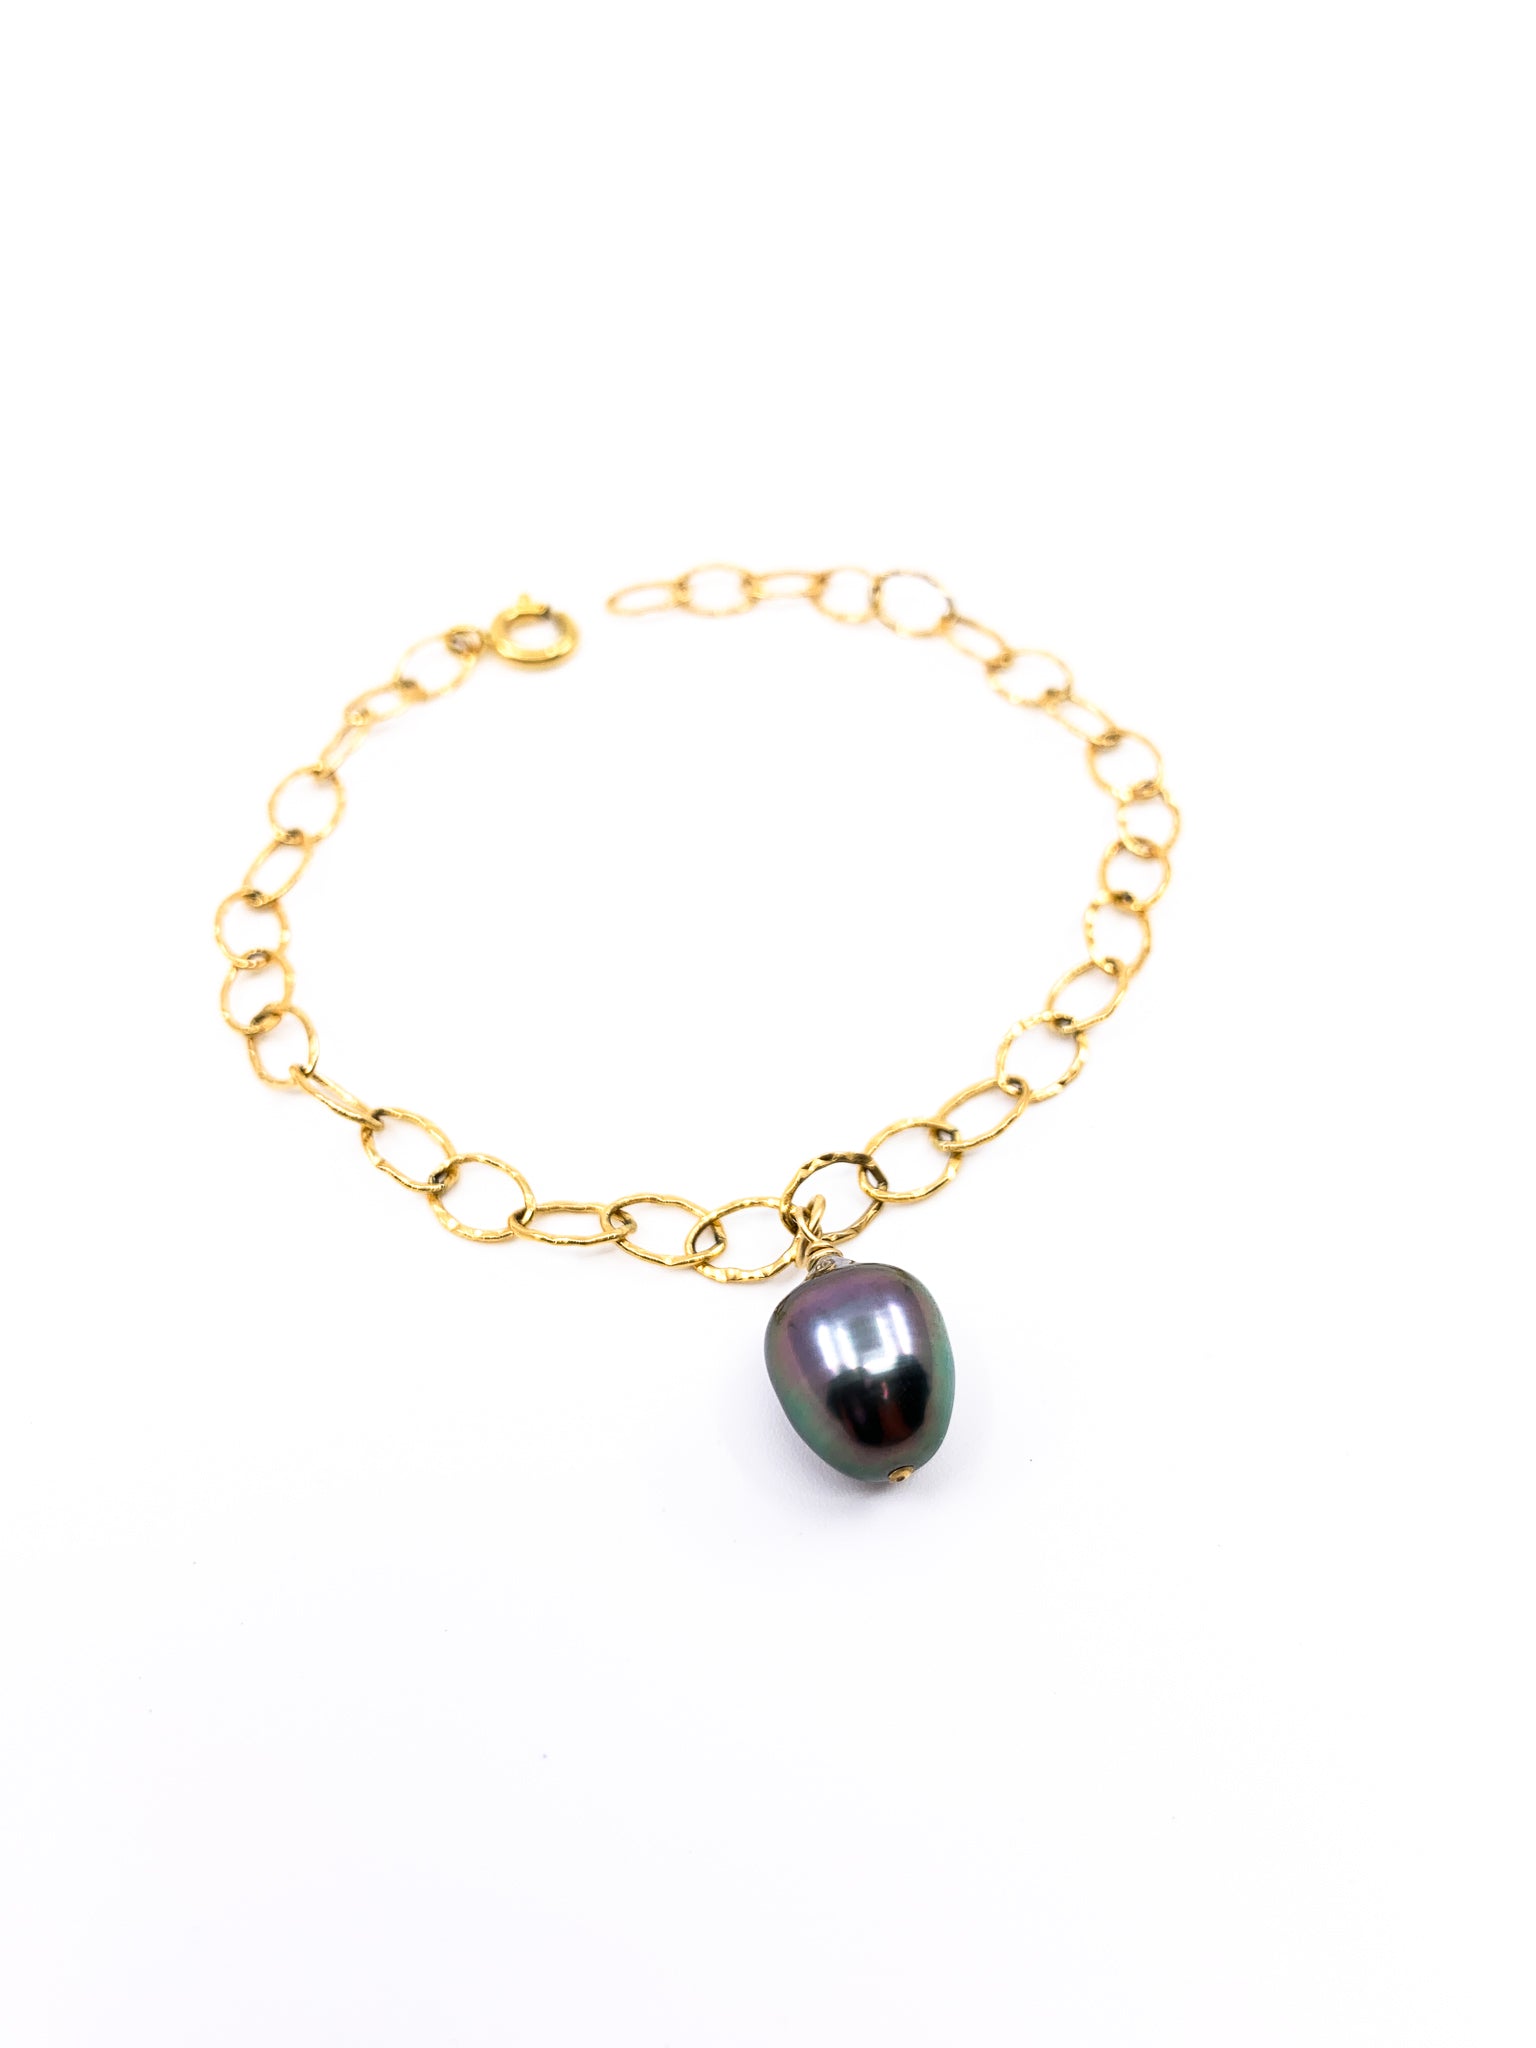 Tahitian pearl gold chain charm bracelet by eve black jewelry made in Hawaii